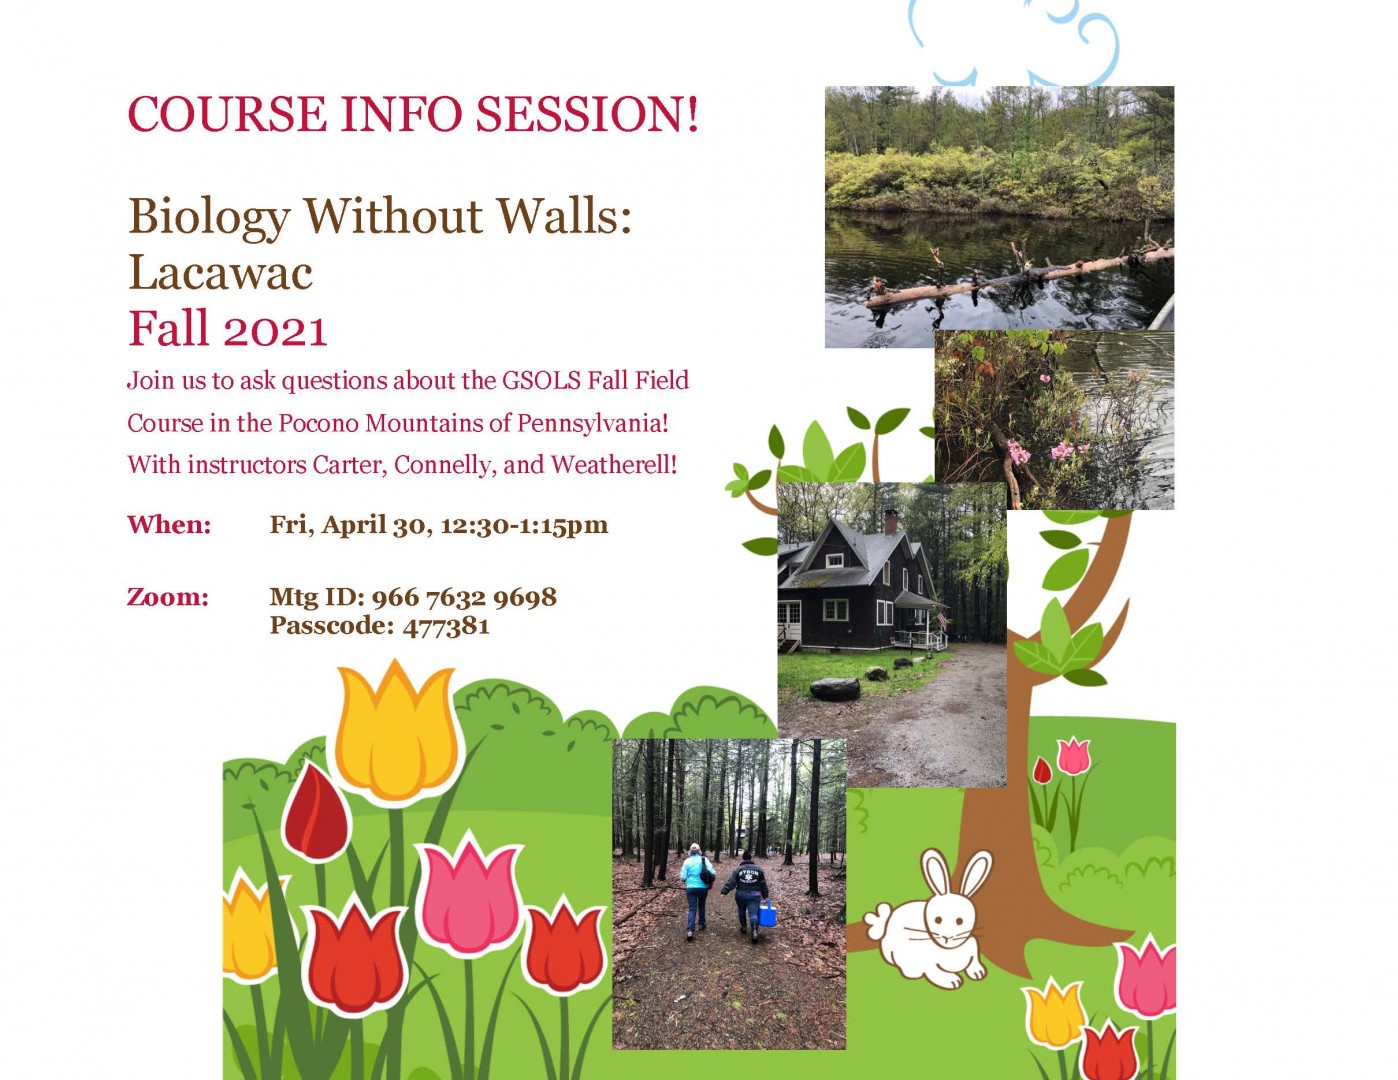 Biology without Walls Lacawac Course Information Session